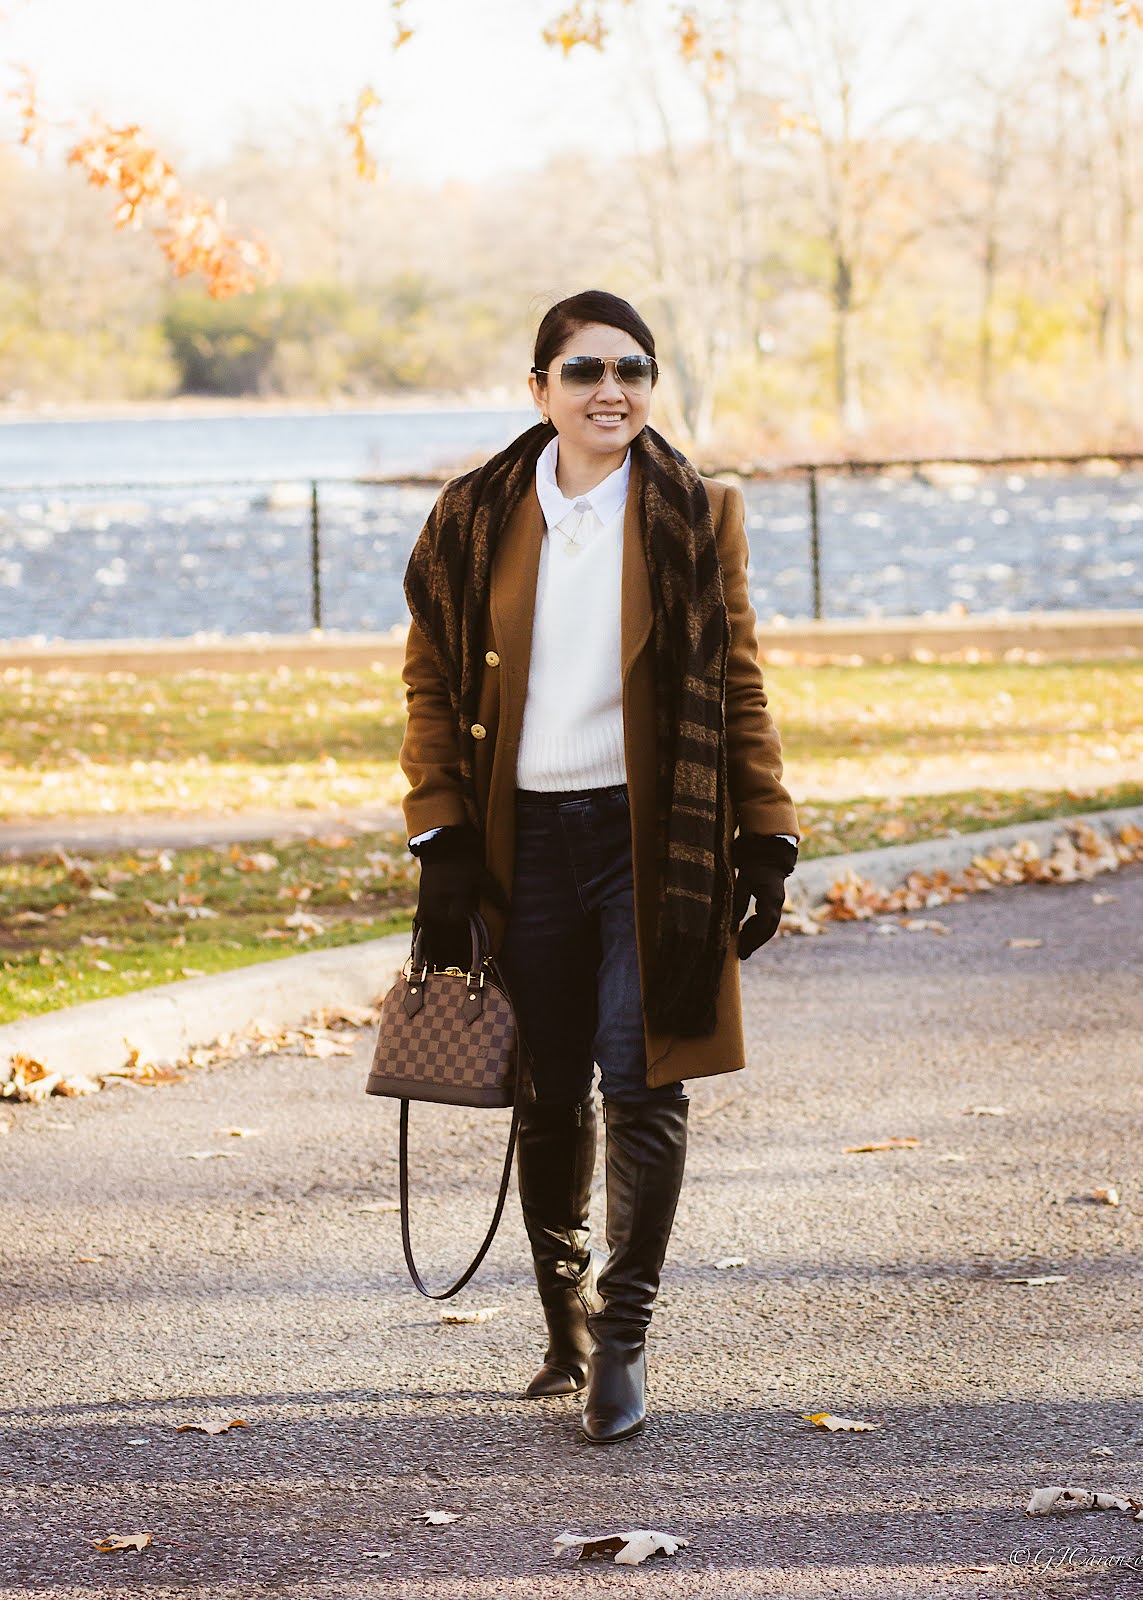 Franco Sarto Knee High Boots | HM Scarf | Ray-Ban Aviator Sunglasses | Mango Knit Vest | Louis Vuitton Alma BB | Fall Fashion | Petite Style | Lee Riders Long Sleeve Shirt | Old Navy Built-in Warm Jeggings